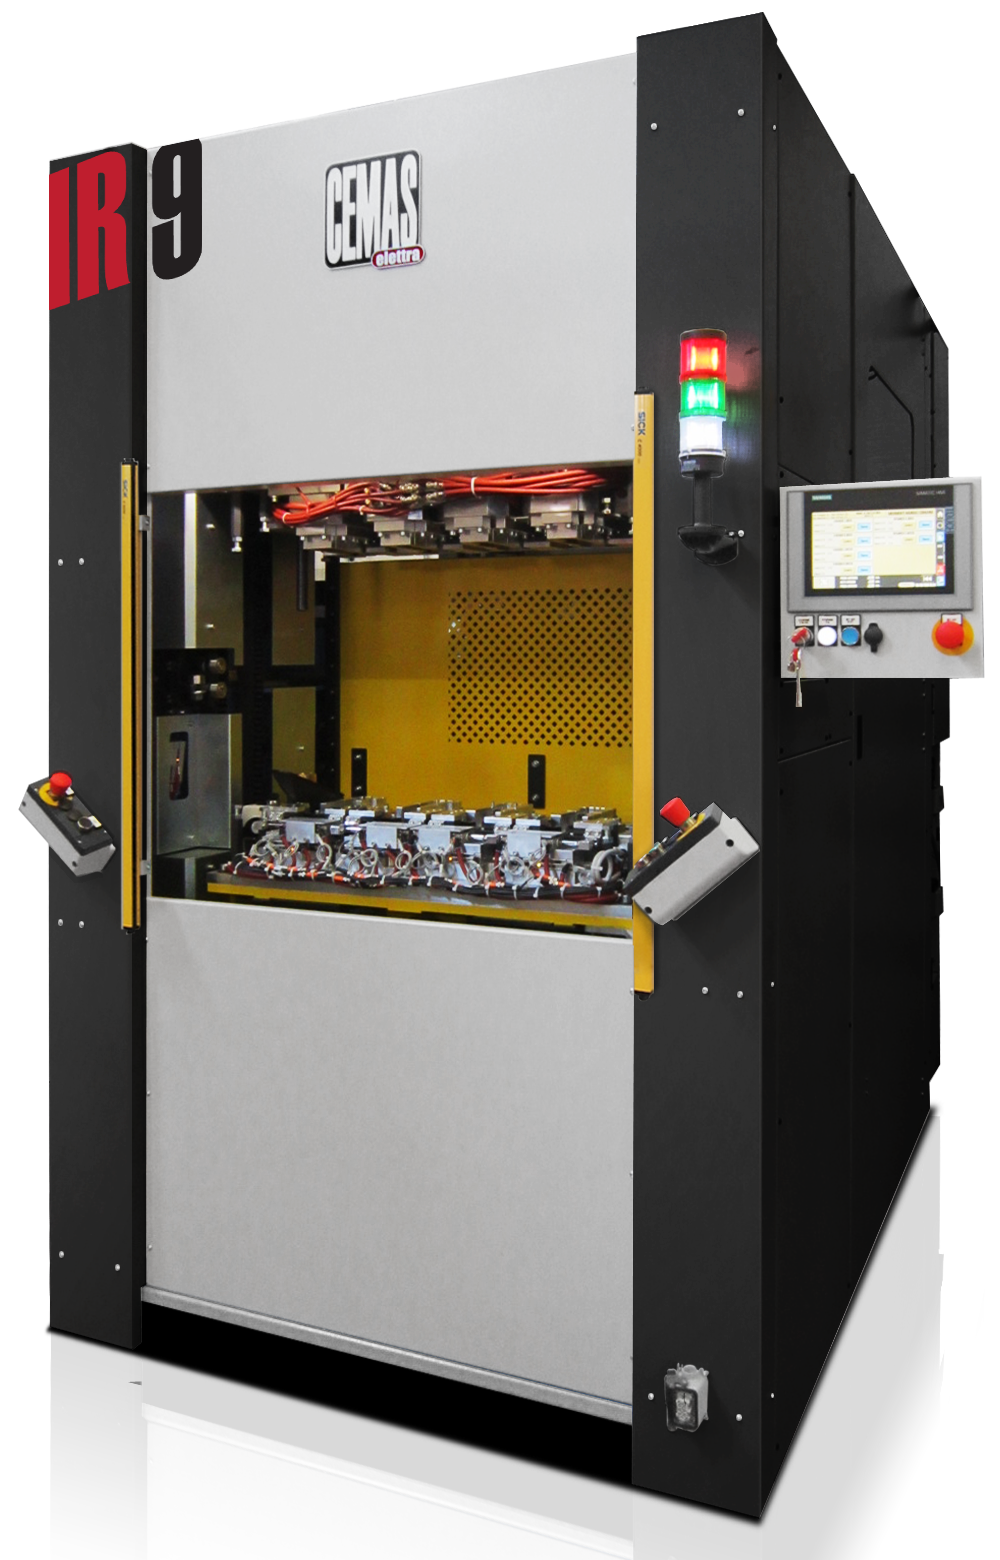 UK Suppliers of High Performance Infrared Welding Machines